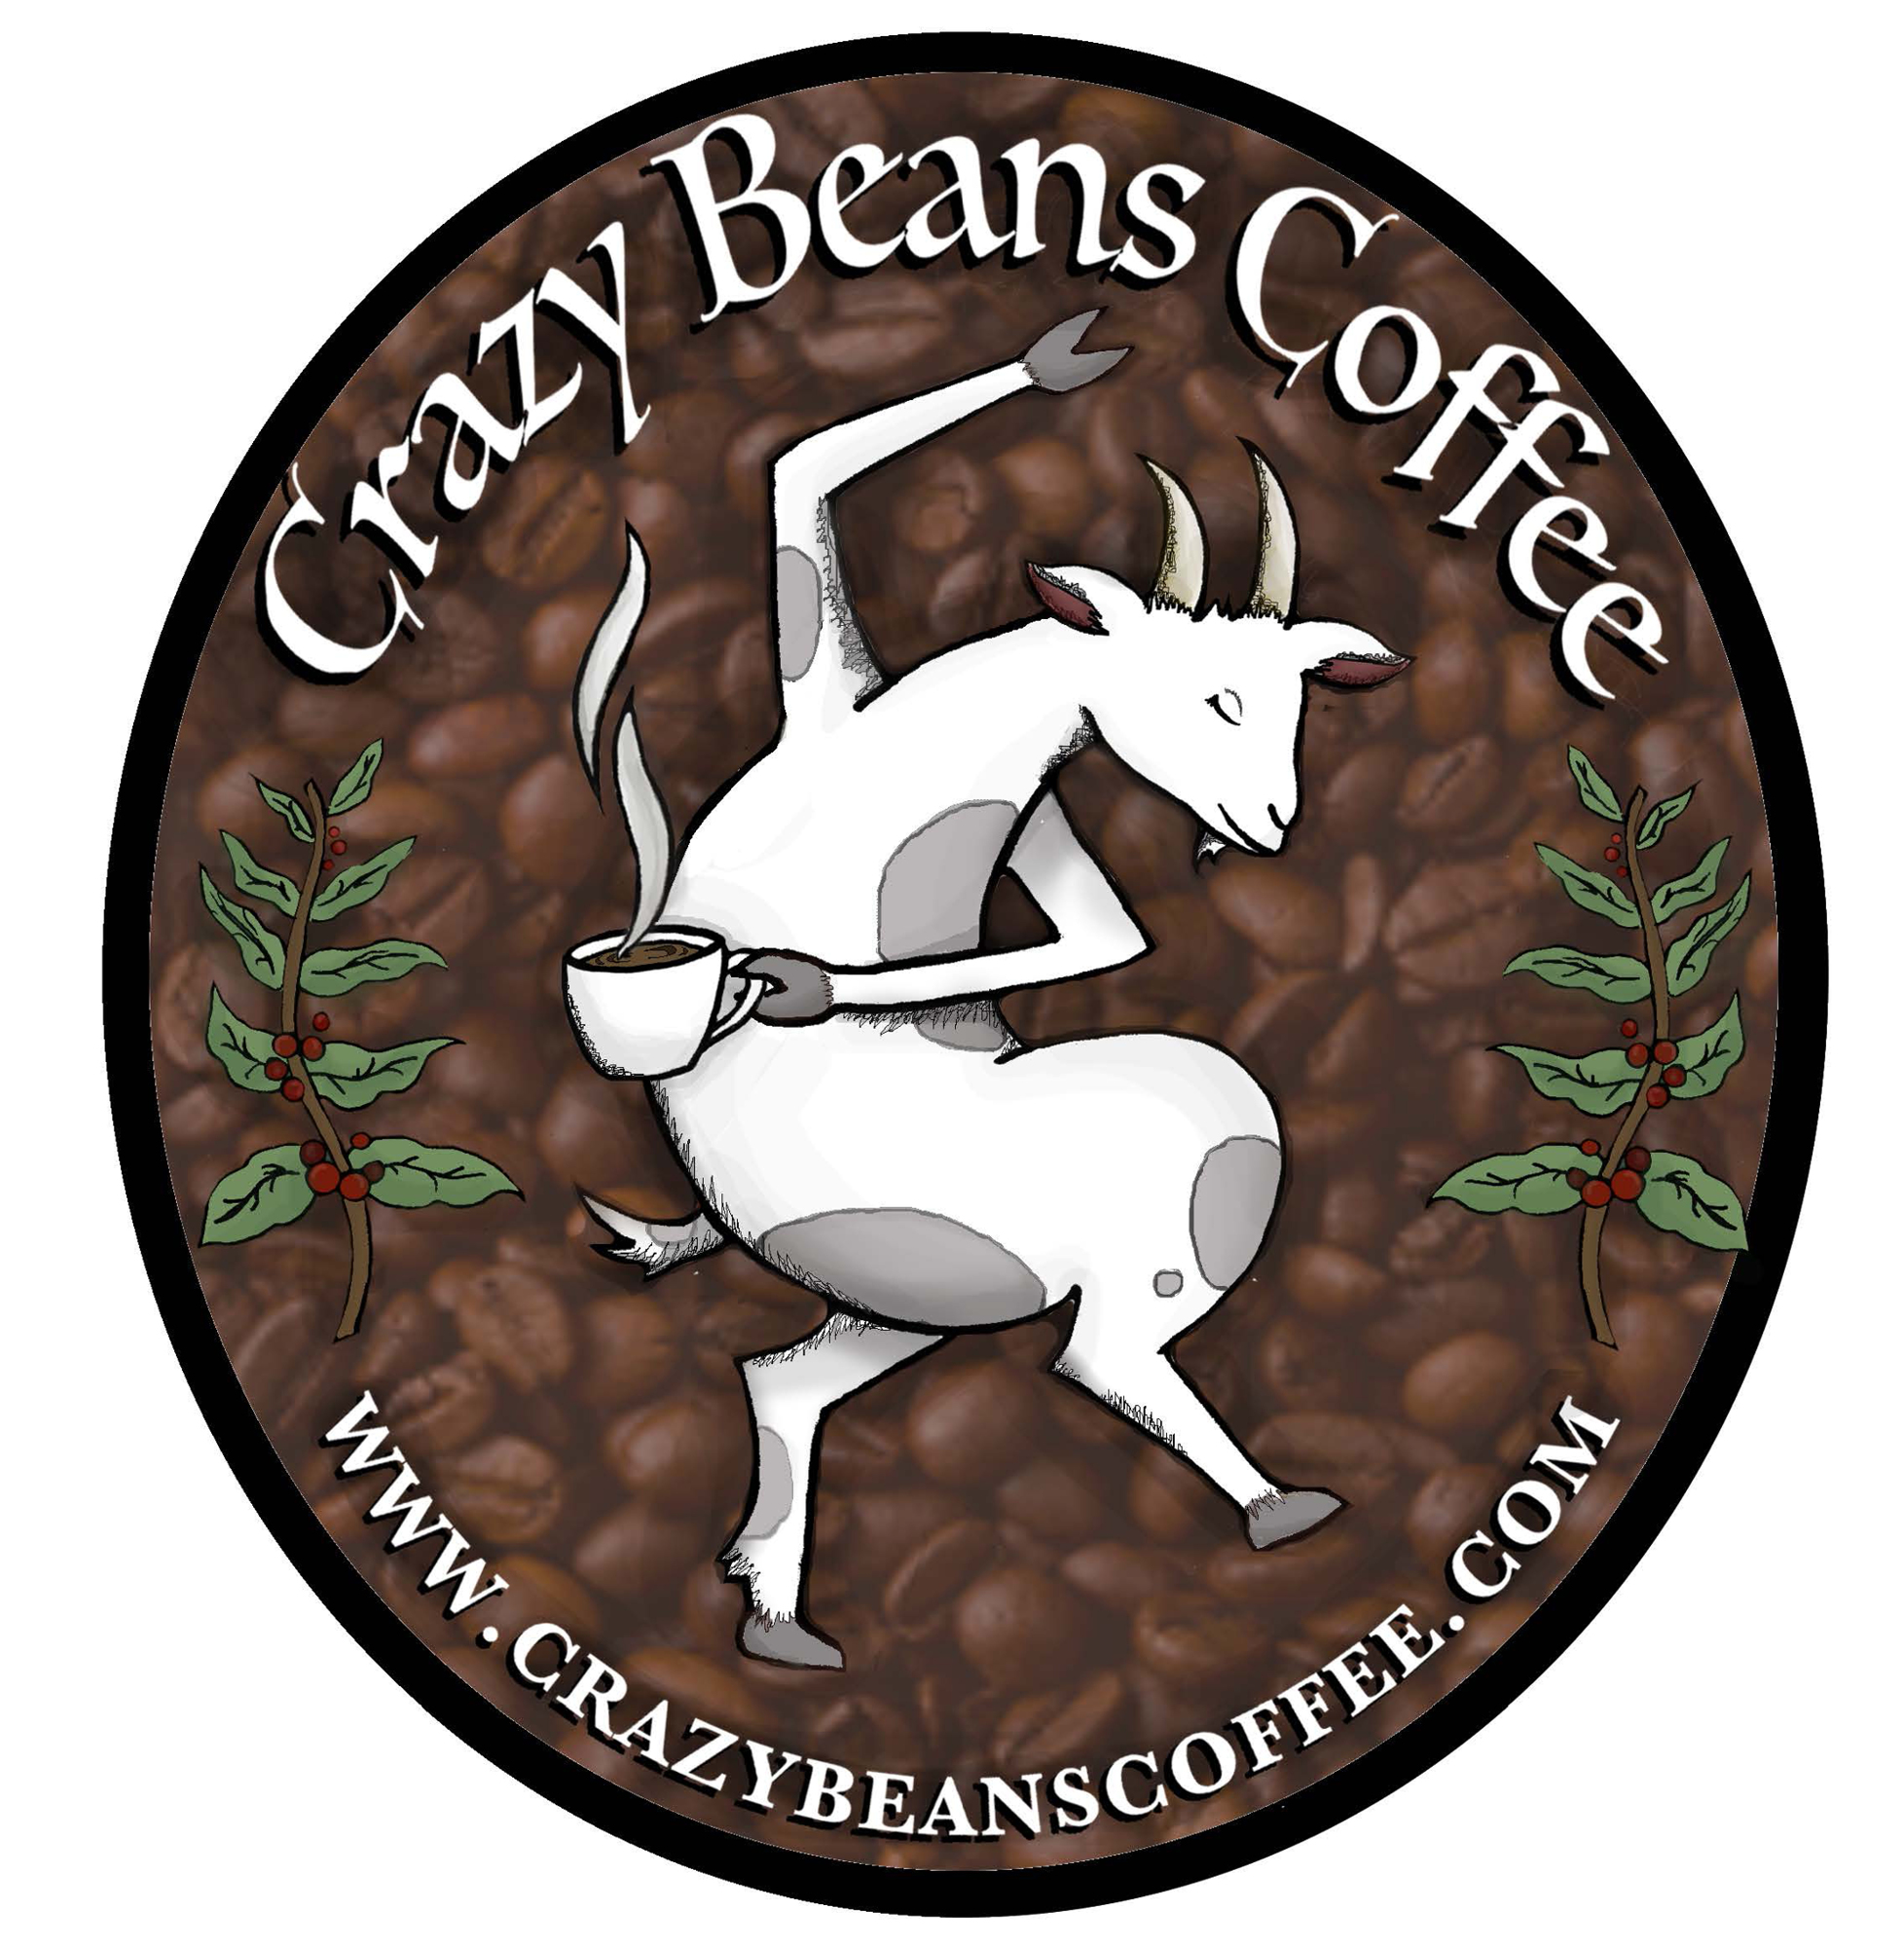 The logo for Crazy Beans Coffee. The company’s first location is in Fleming Island.